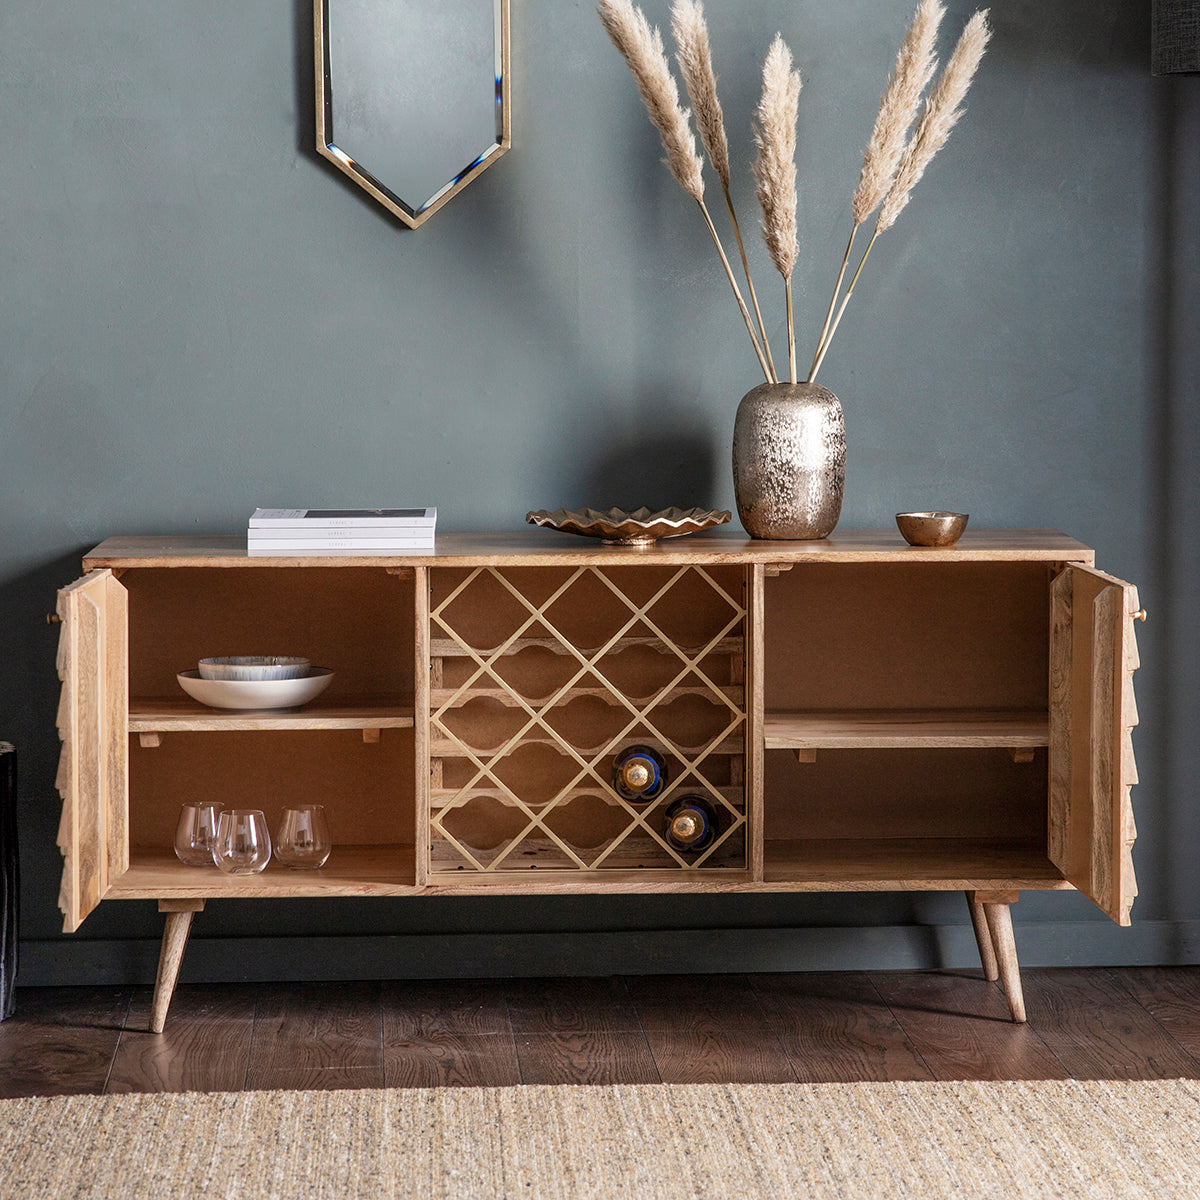 A Tuscany Wine Sideboard, an interior decor piece by Kikiathome.co.uk, displaying home furniture with a wine rack.